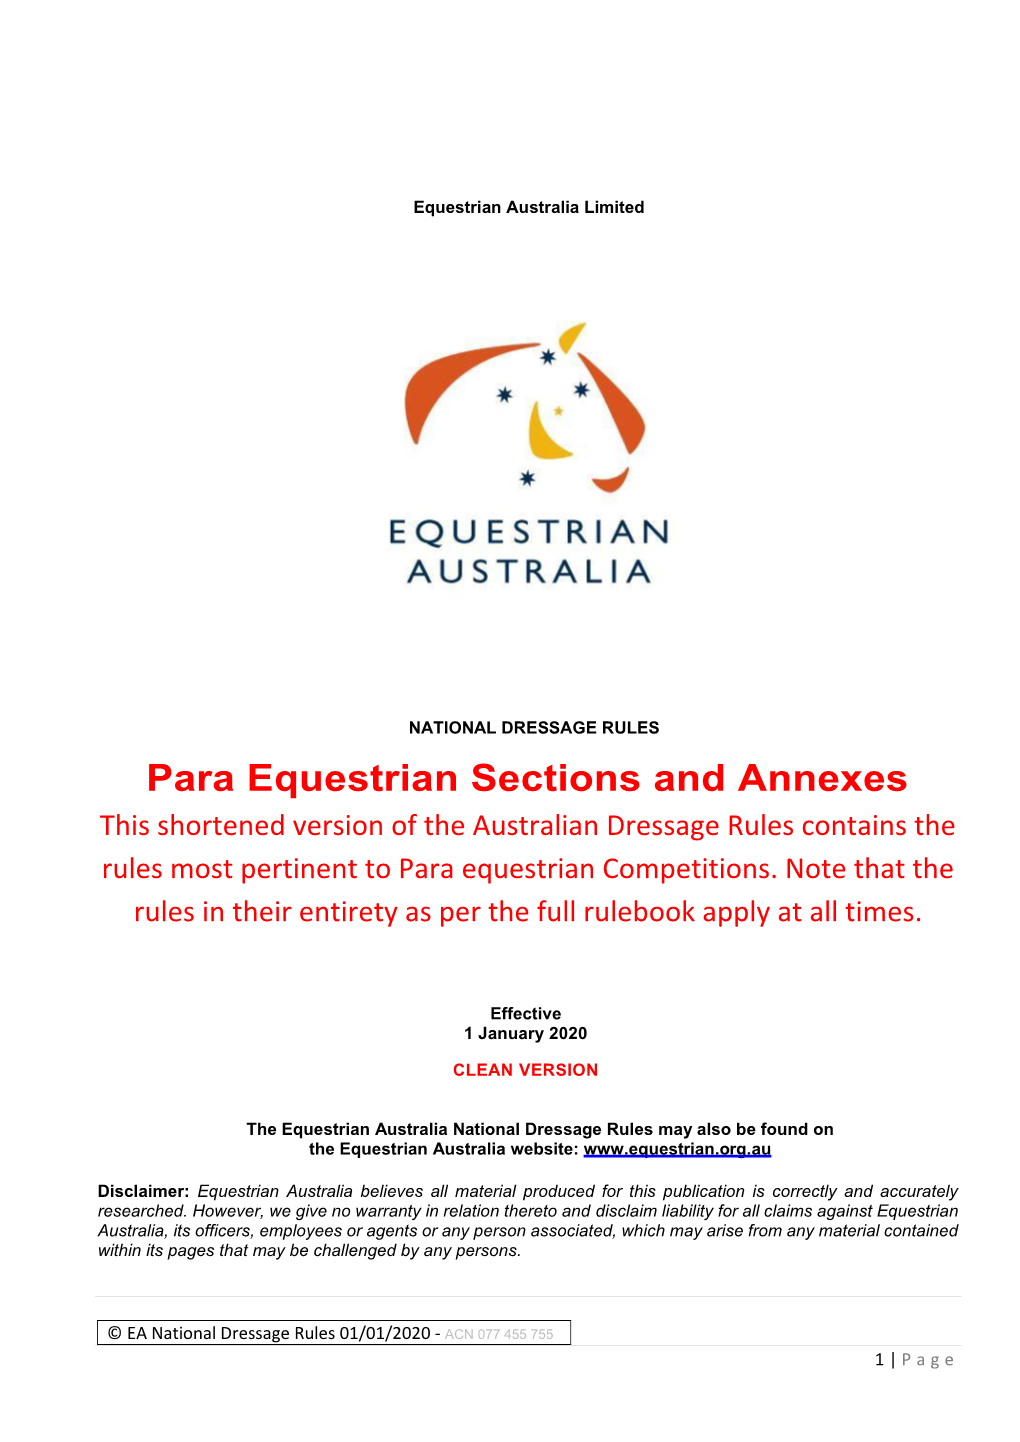 Para Equestrian Sections and Annexes This Shortened Version of the Australian Dressage Rules Contains the Rules Most Pertinent to Para Equestrian Competitions